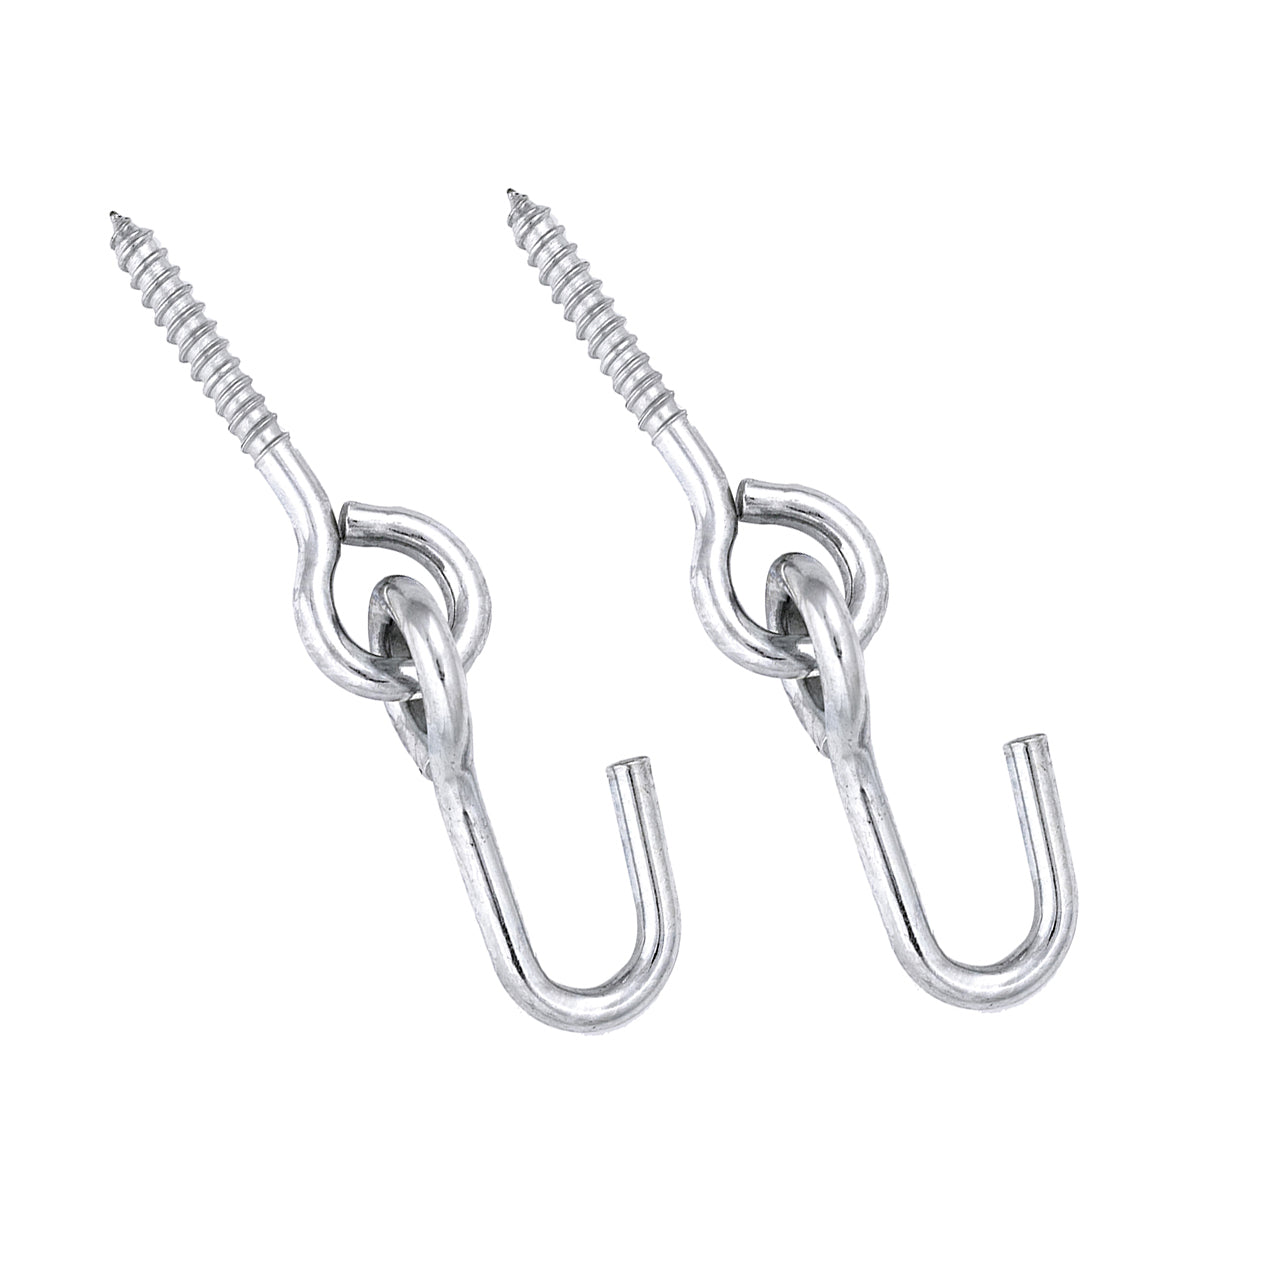 Two metal eye screws with attached hooks.